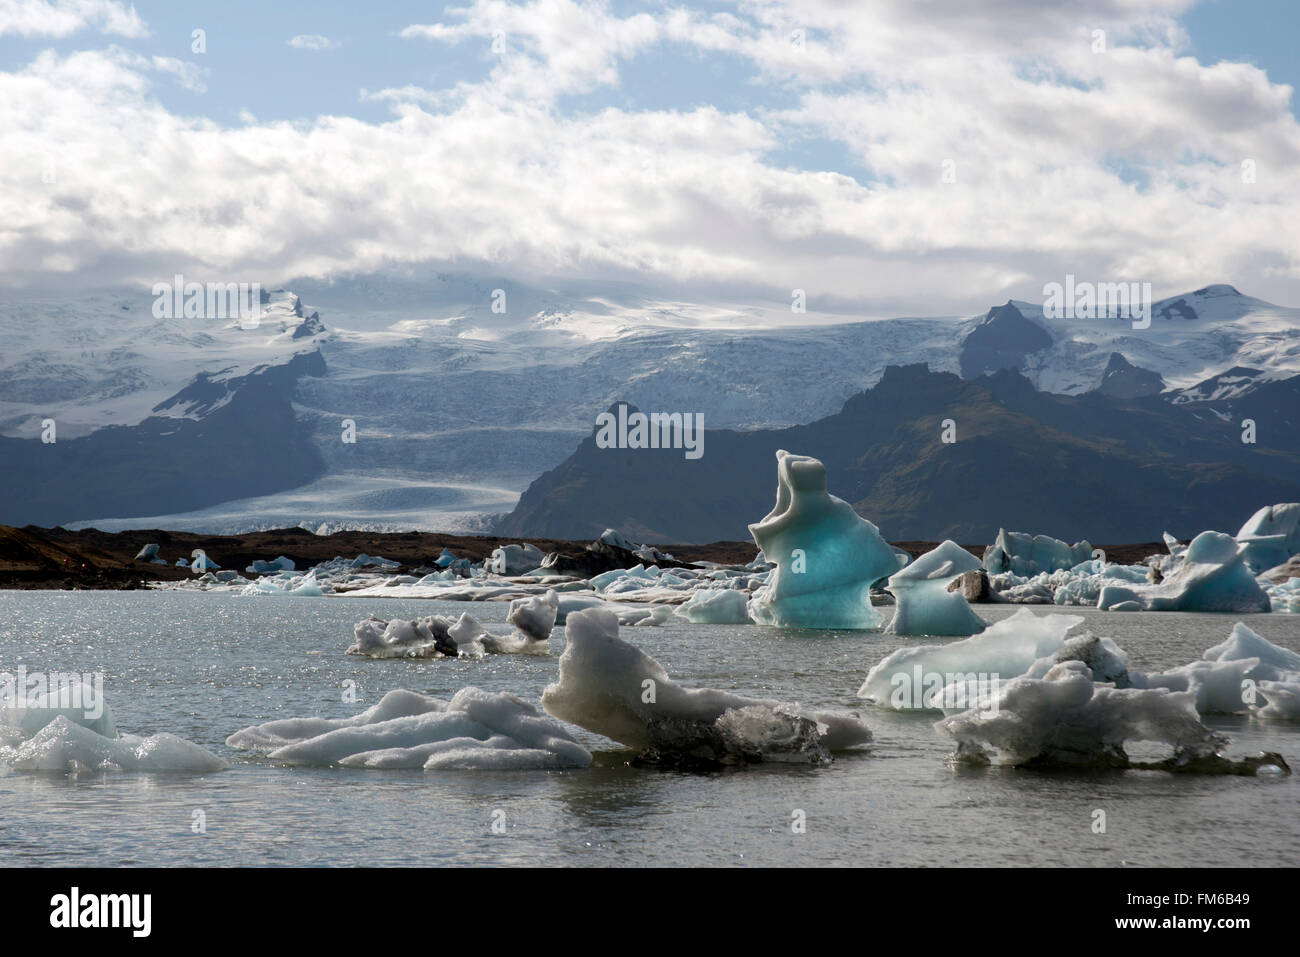 A stunning landscape of a lagoon in Iceland, with the ice cold water and small icebergs, and snowy mountains in the background. Stock Photo